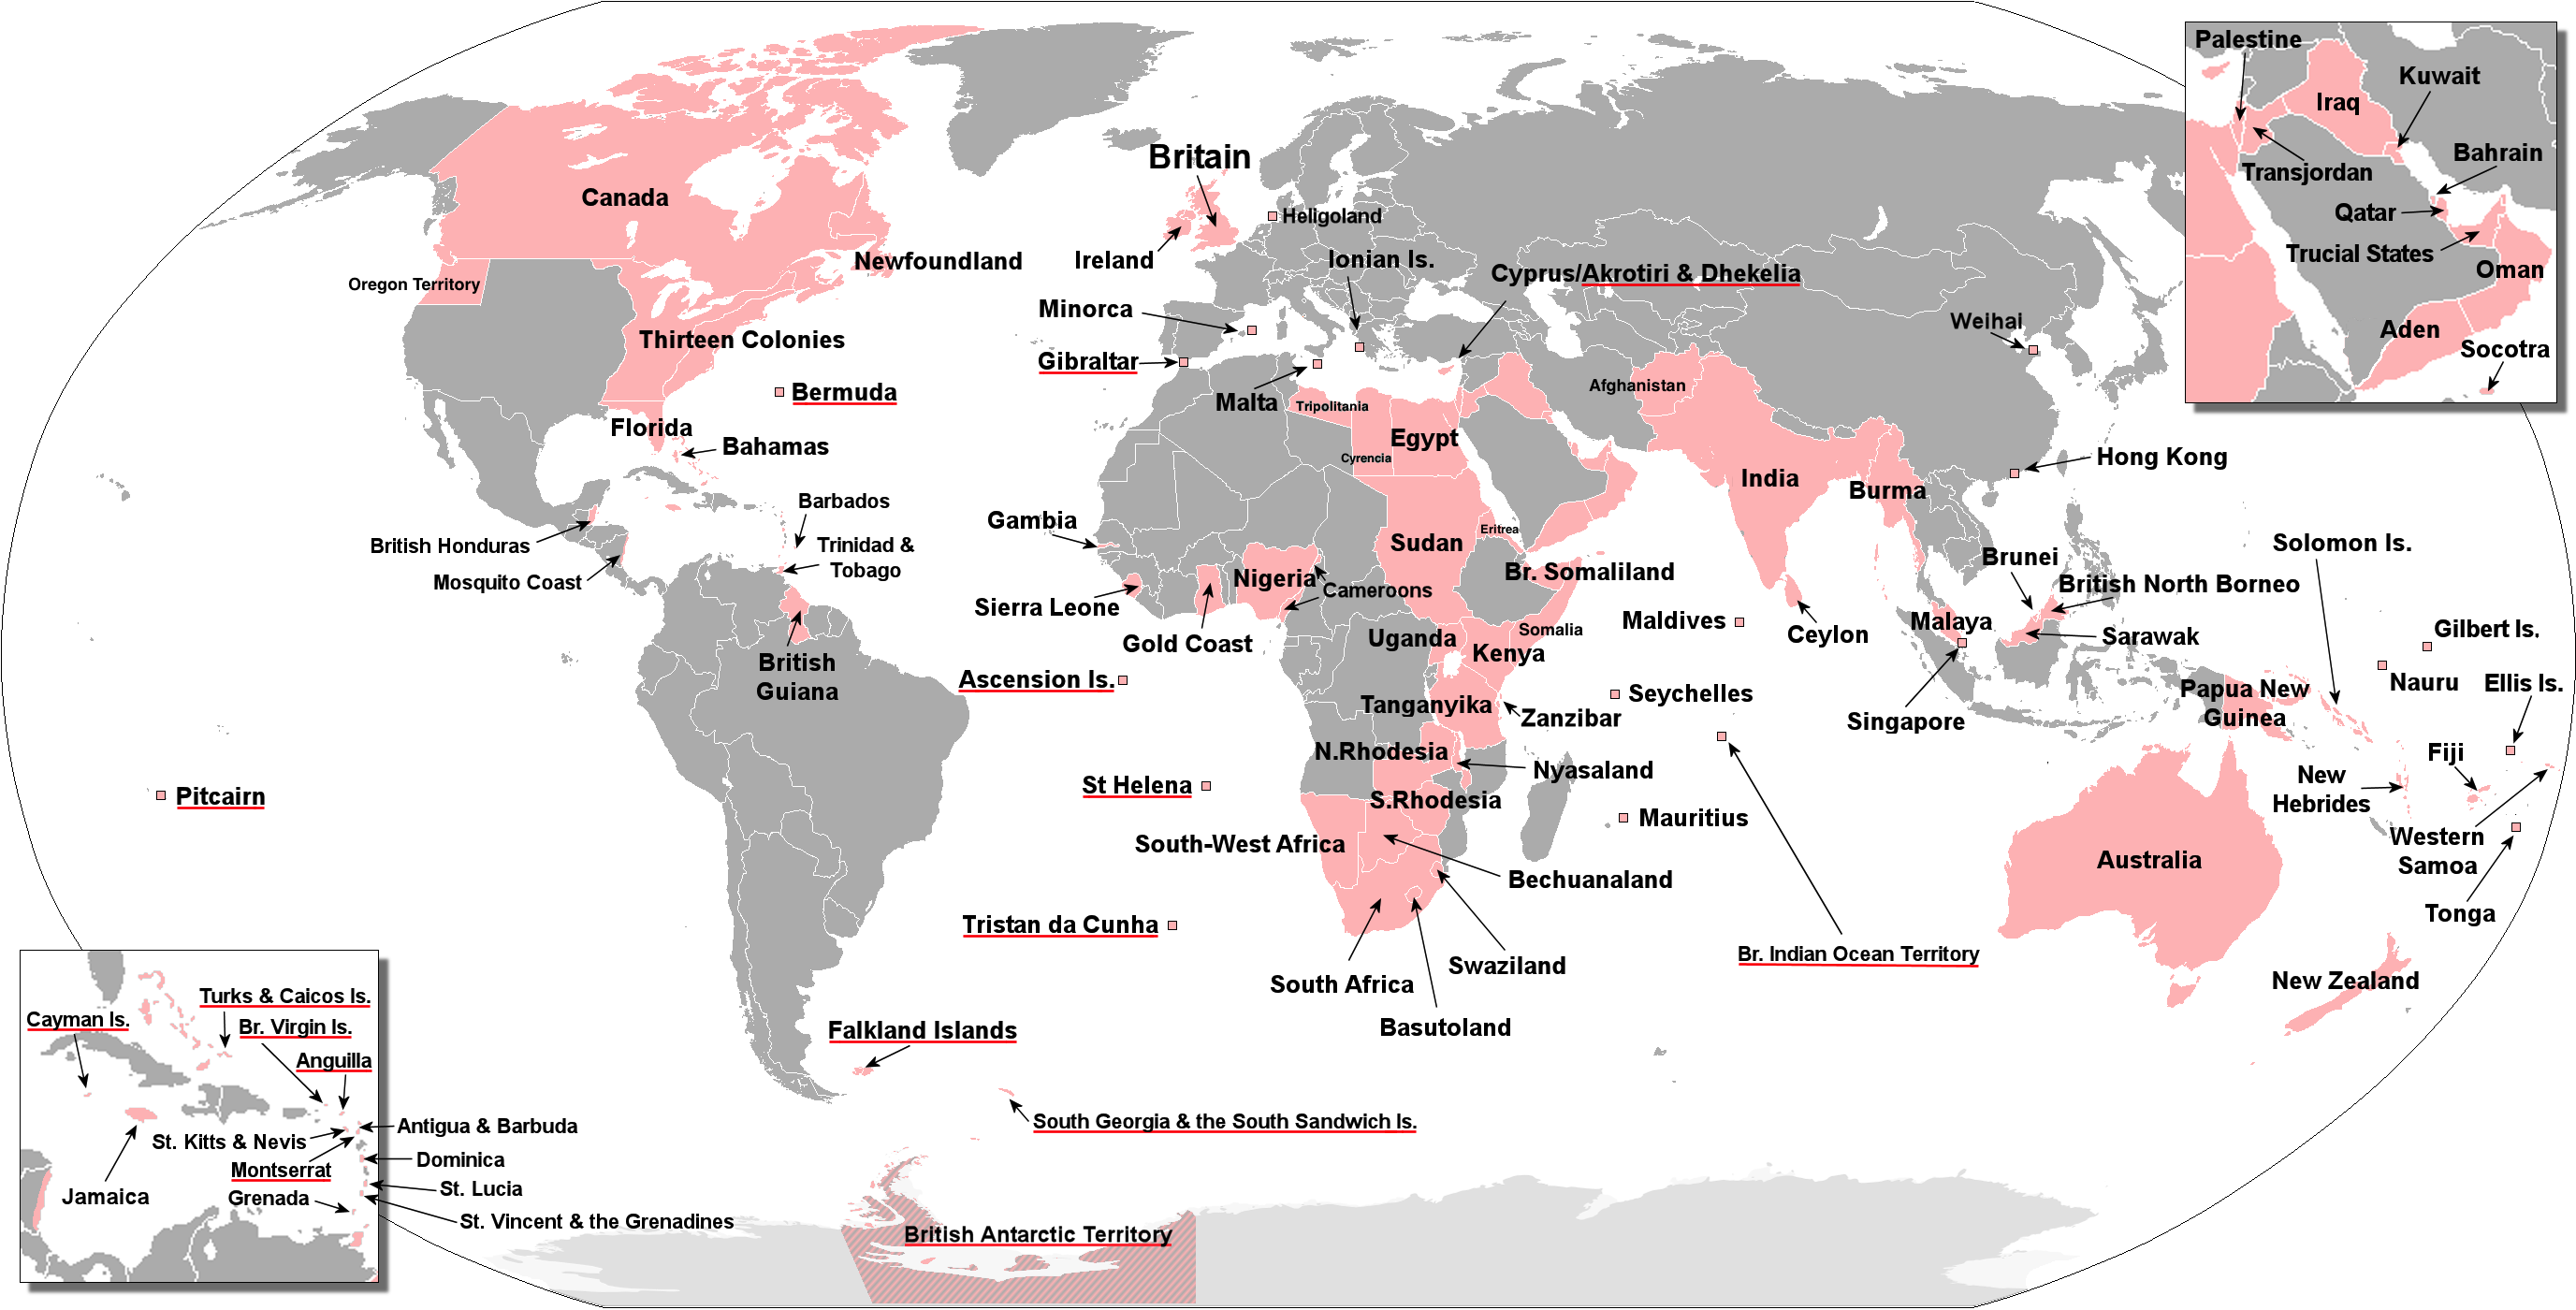 The British Empire | Modern Empires and Imperialism